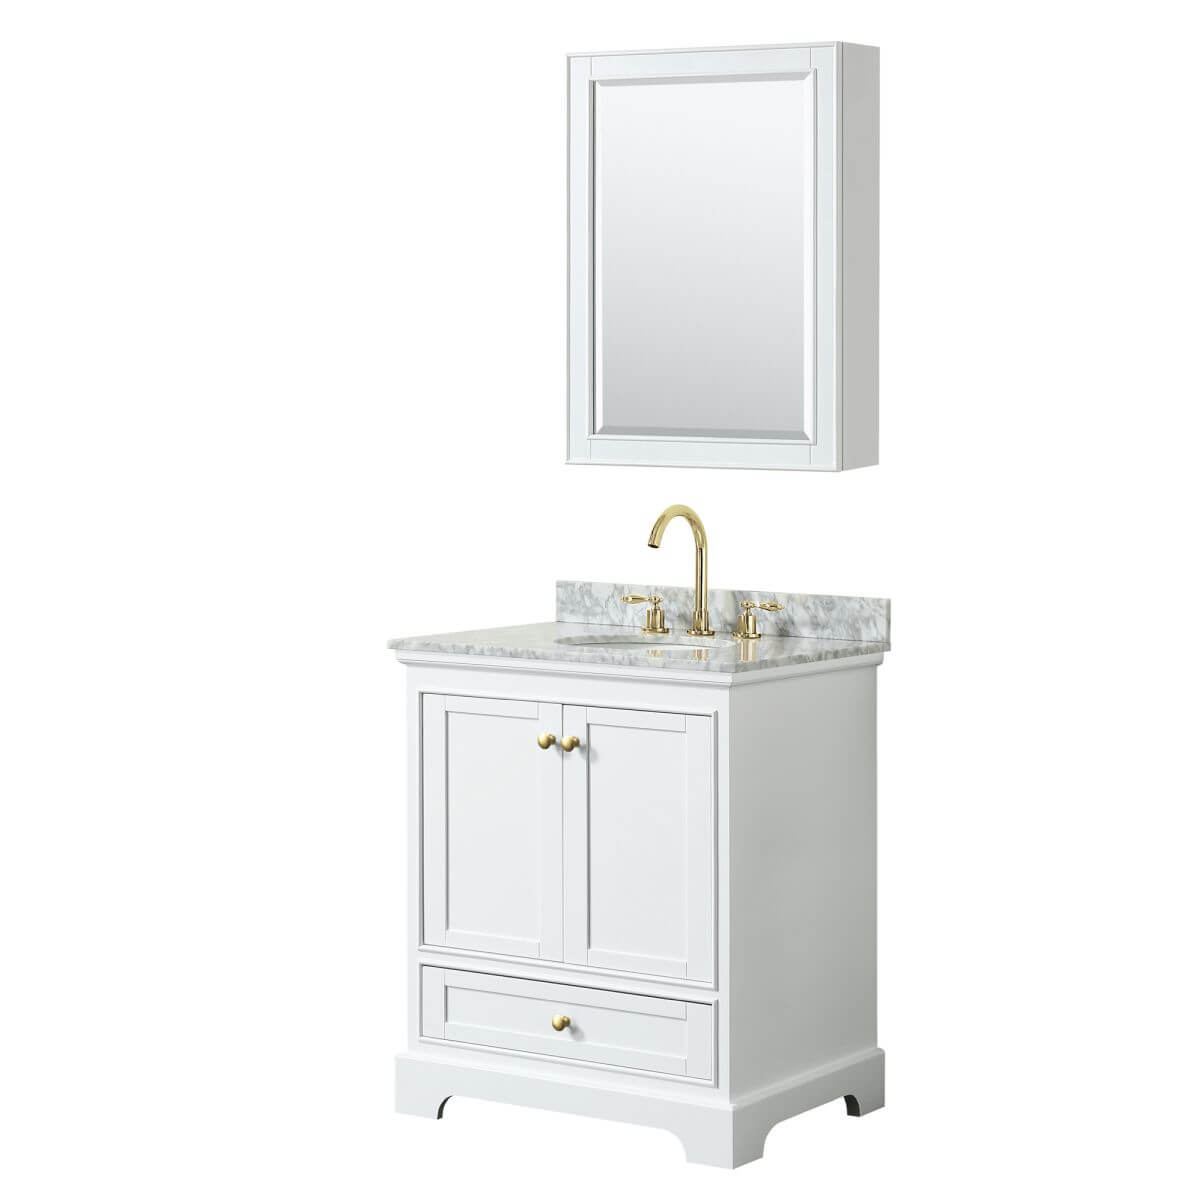 Wyndham Collection Deborah 30 inch Single Bathroom Vanity in White with White Carrara Marble Countertop, Undermount Oval Sink, Brushed Gold Trim and Medicine Cabinet - WCS202030SWGCMUNOMED